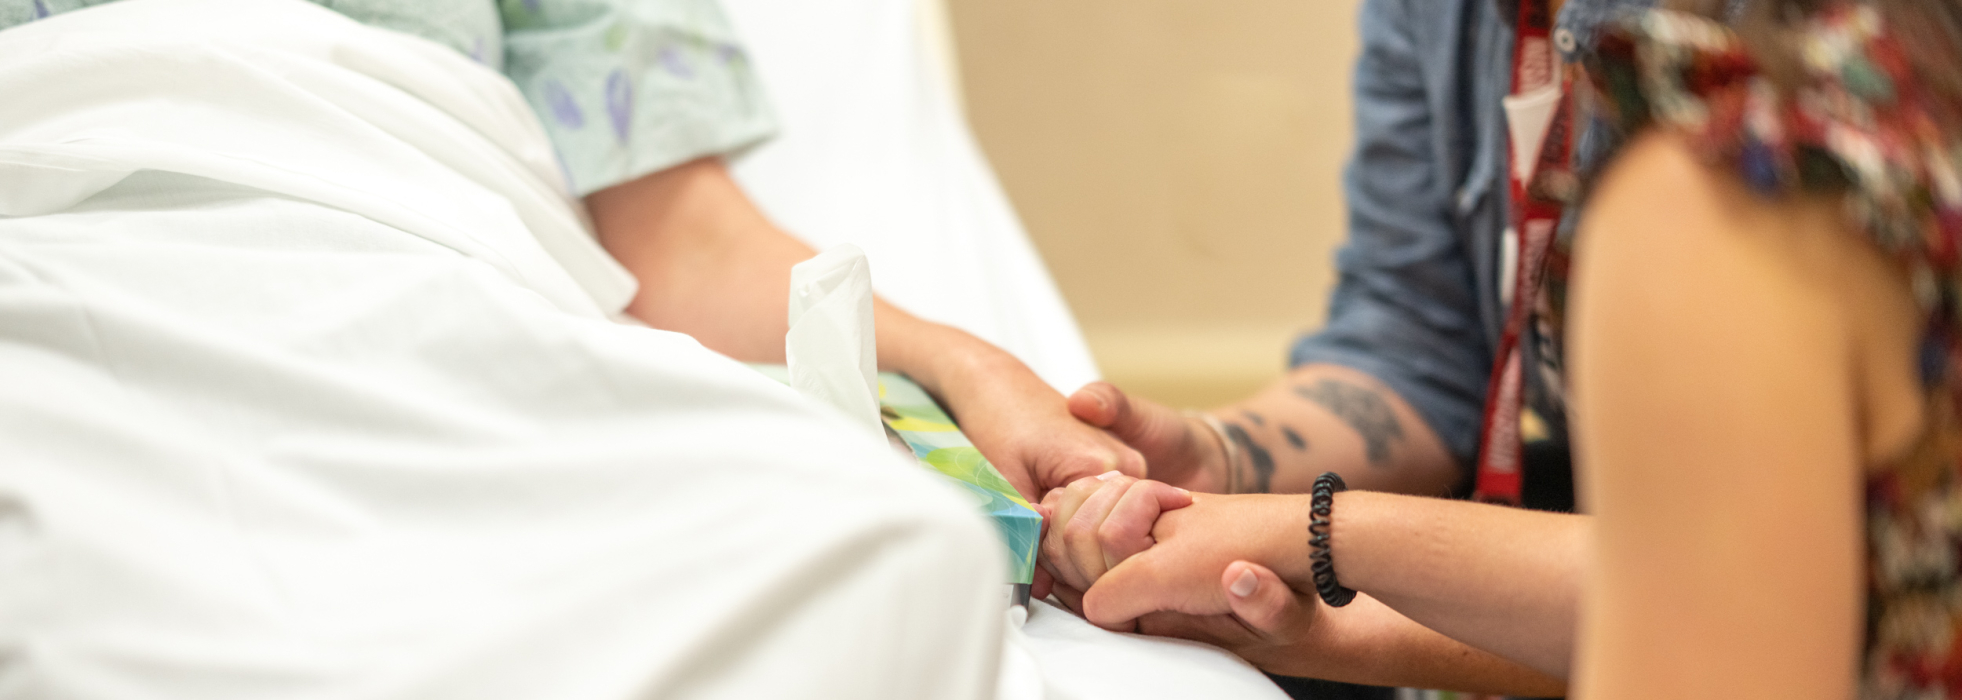 Closeup of patient and companions holding hands at a hospital bedside